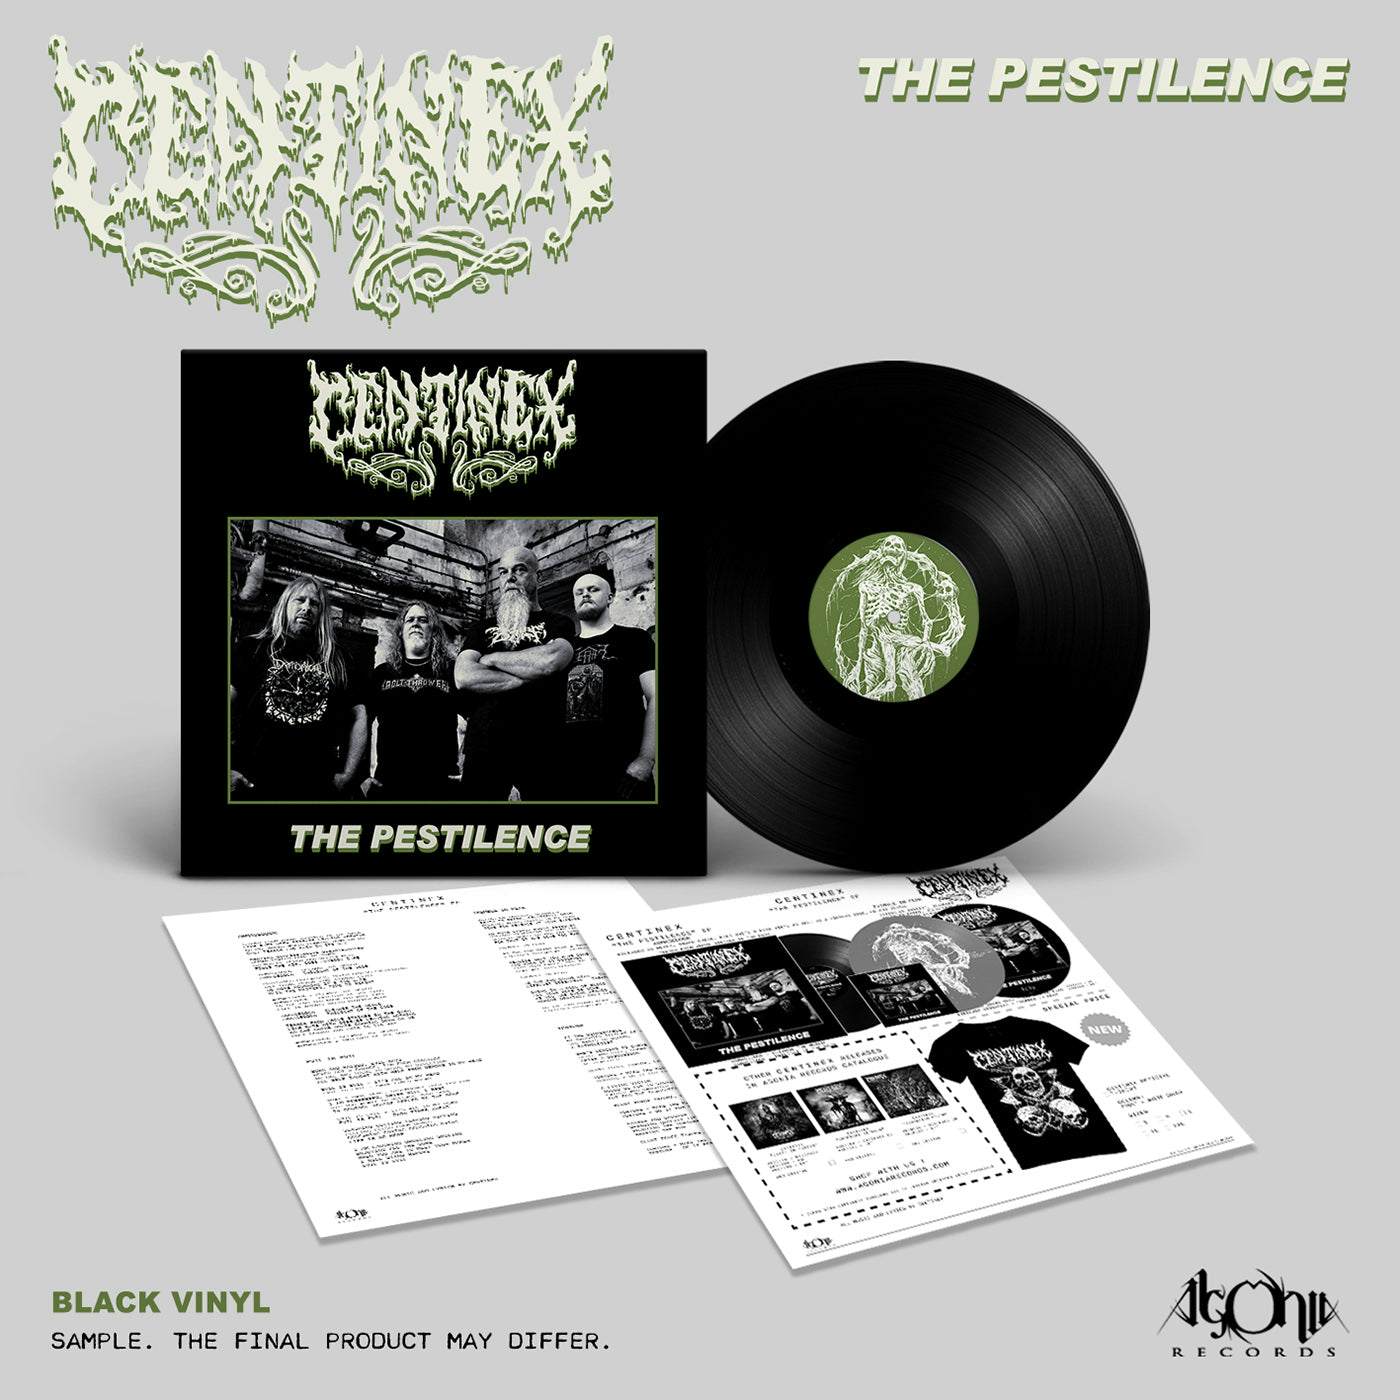 Centinex "The Pestilence" Limited Edition 12"